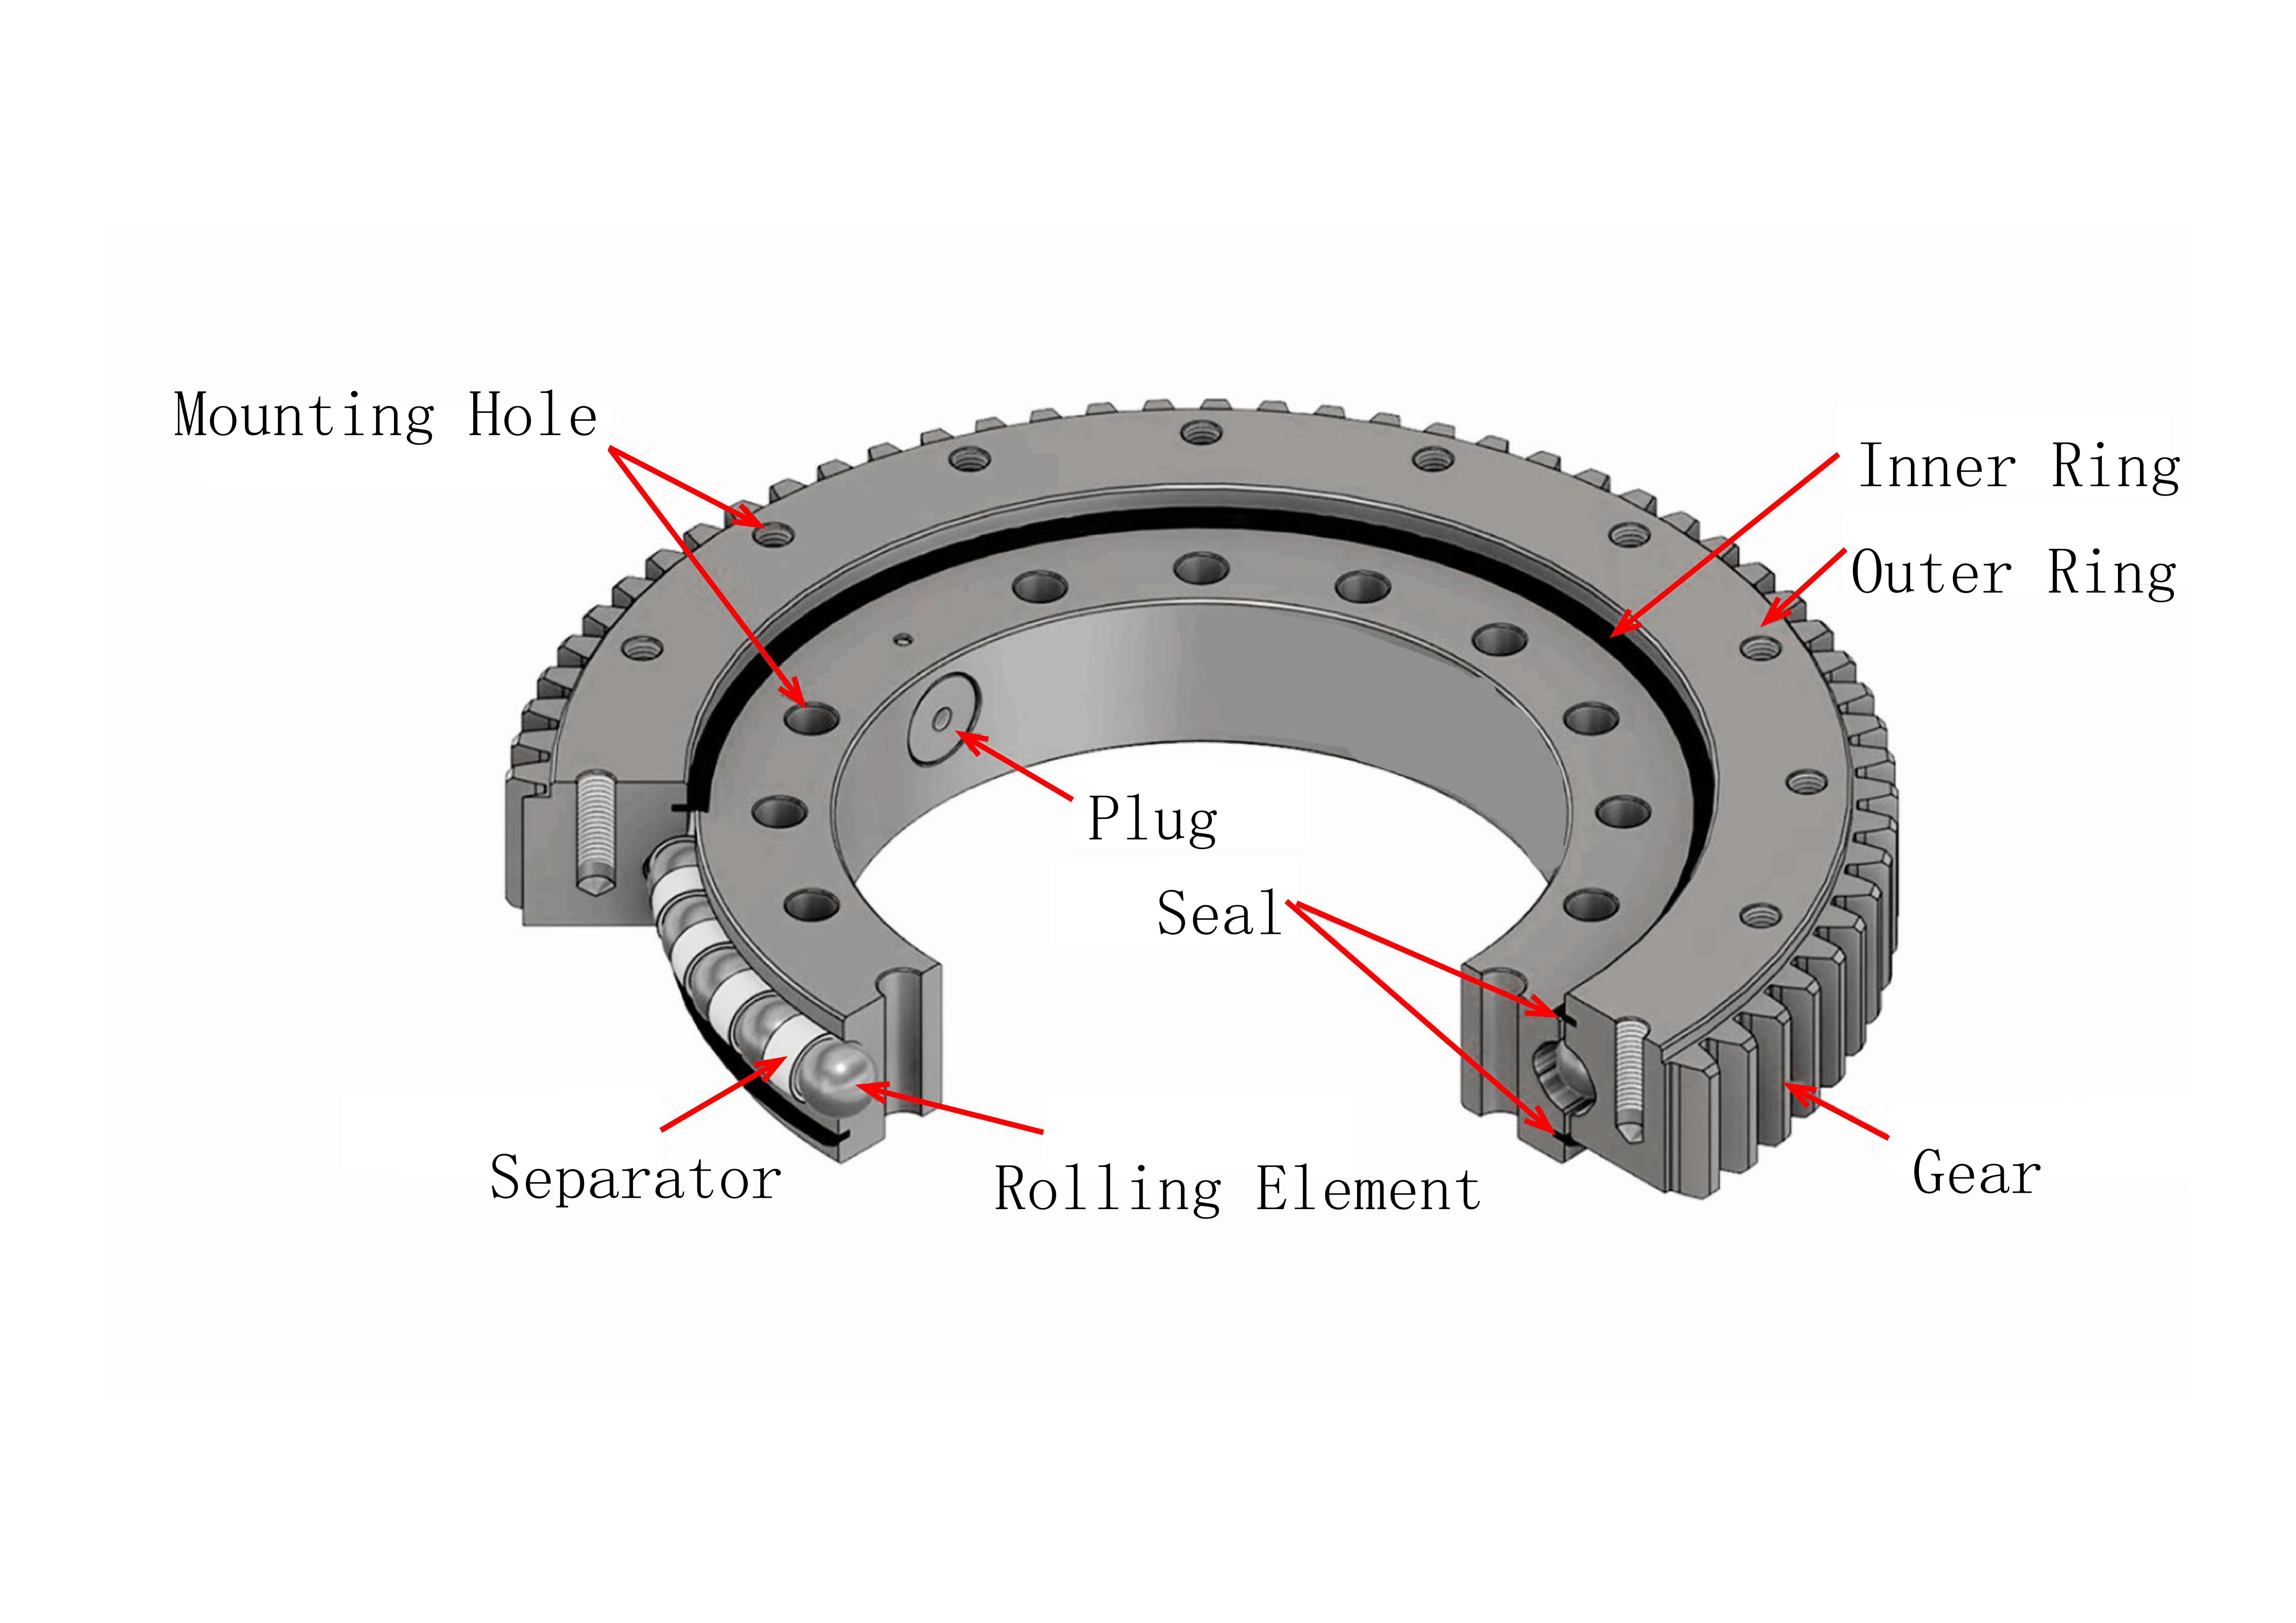 Structure of Slew Bearing